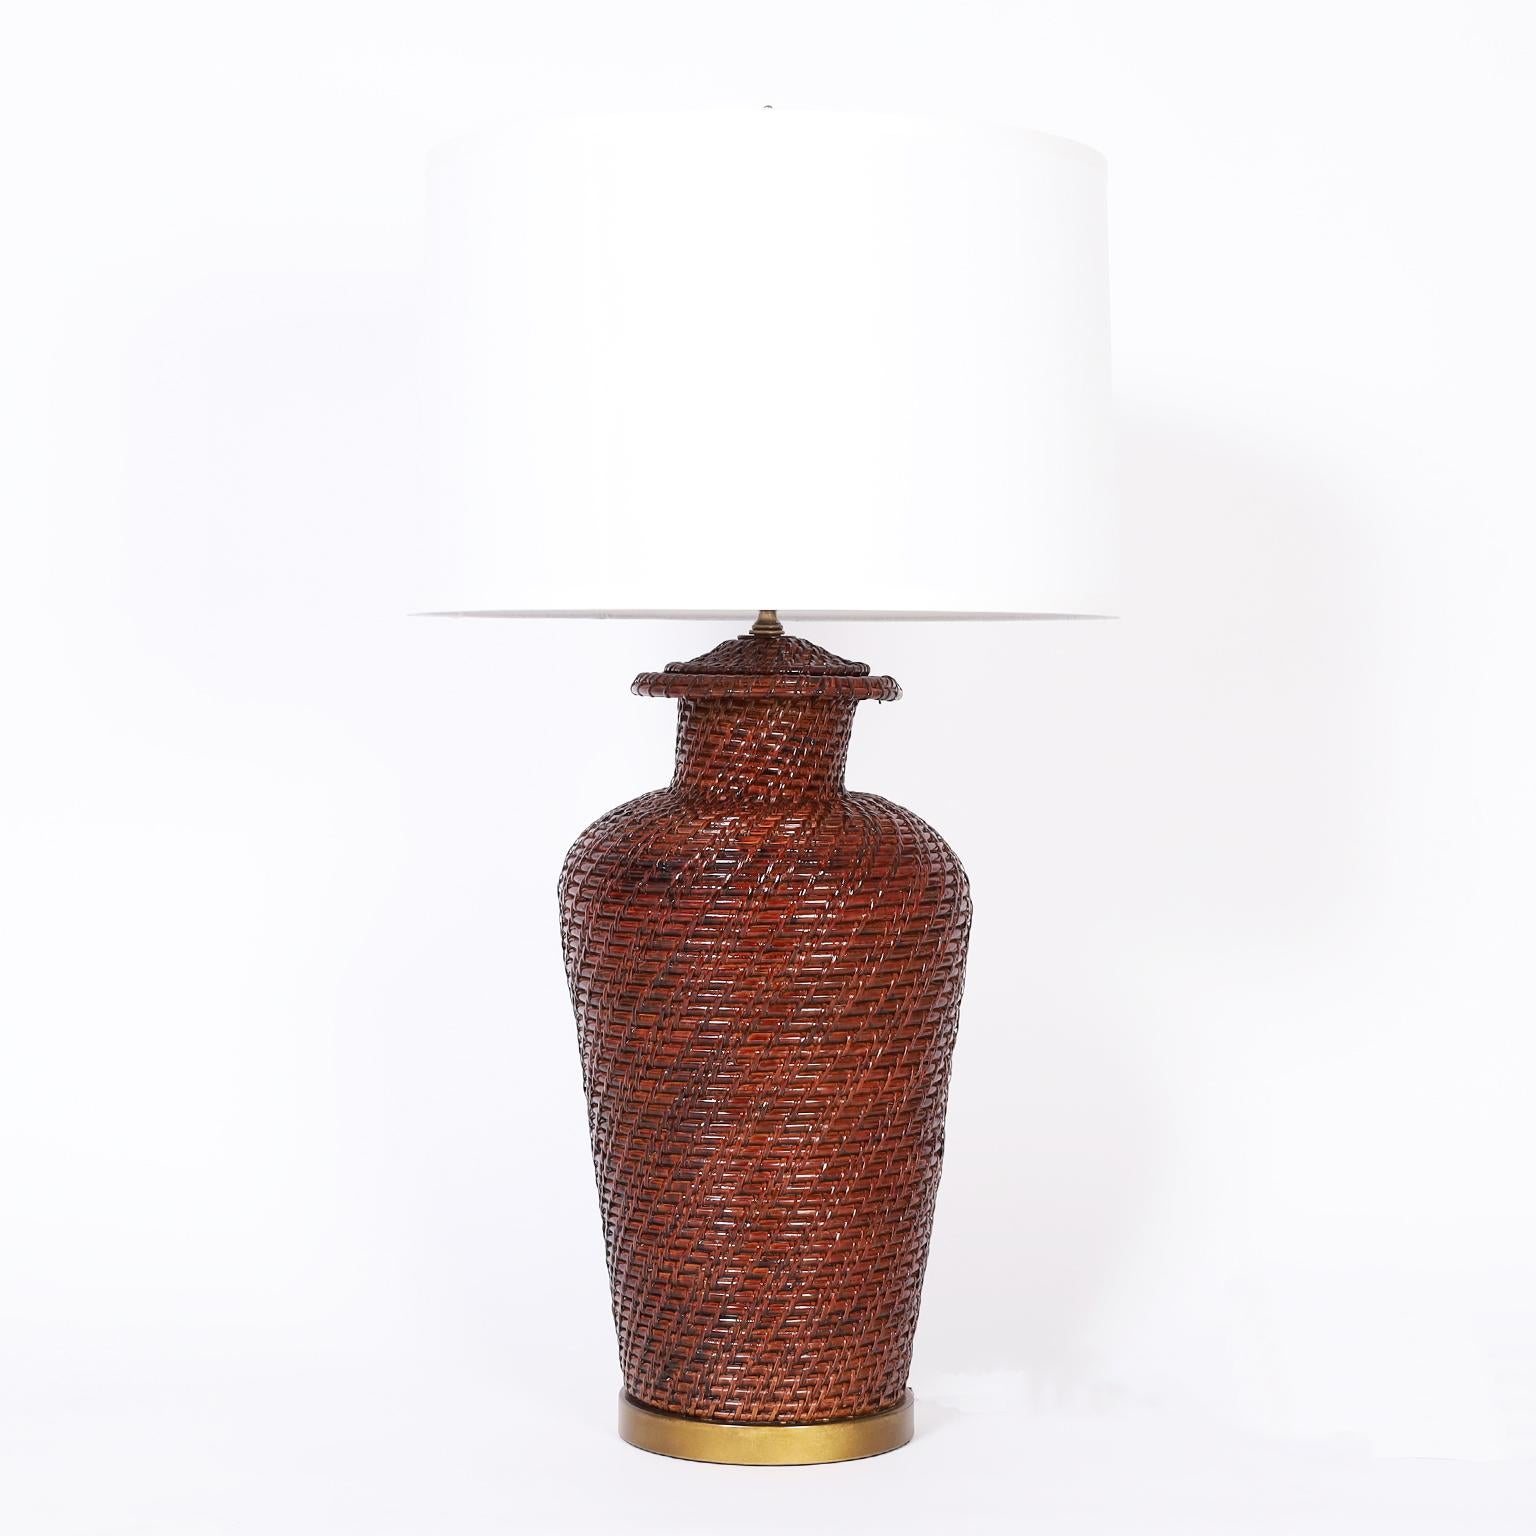 Pair of large scale mid century wicker or reed table lamps stained brown and lacquered with classic form on gold lacquered metal bases.